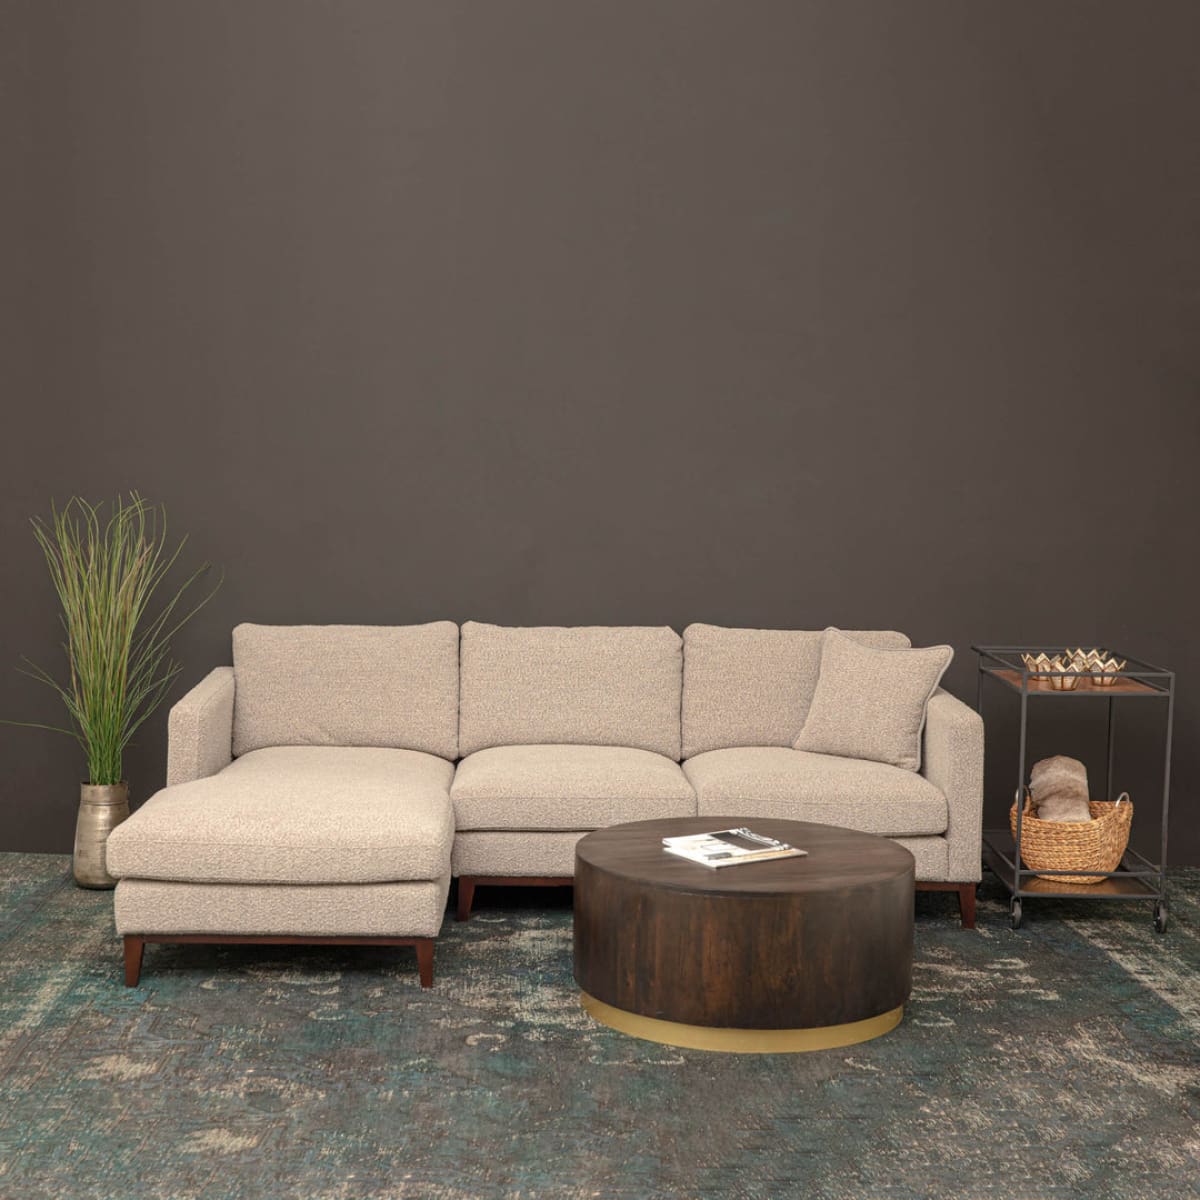 Burbank Sofa Lhf Sectional - lh-import-sectionals